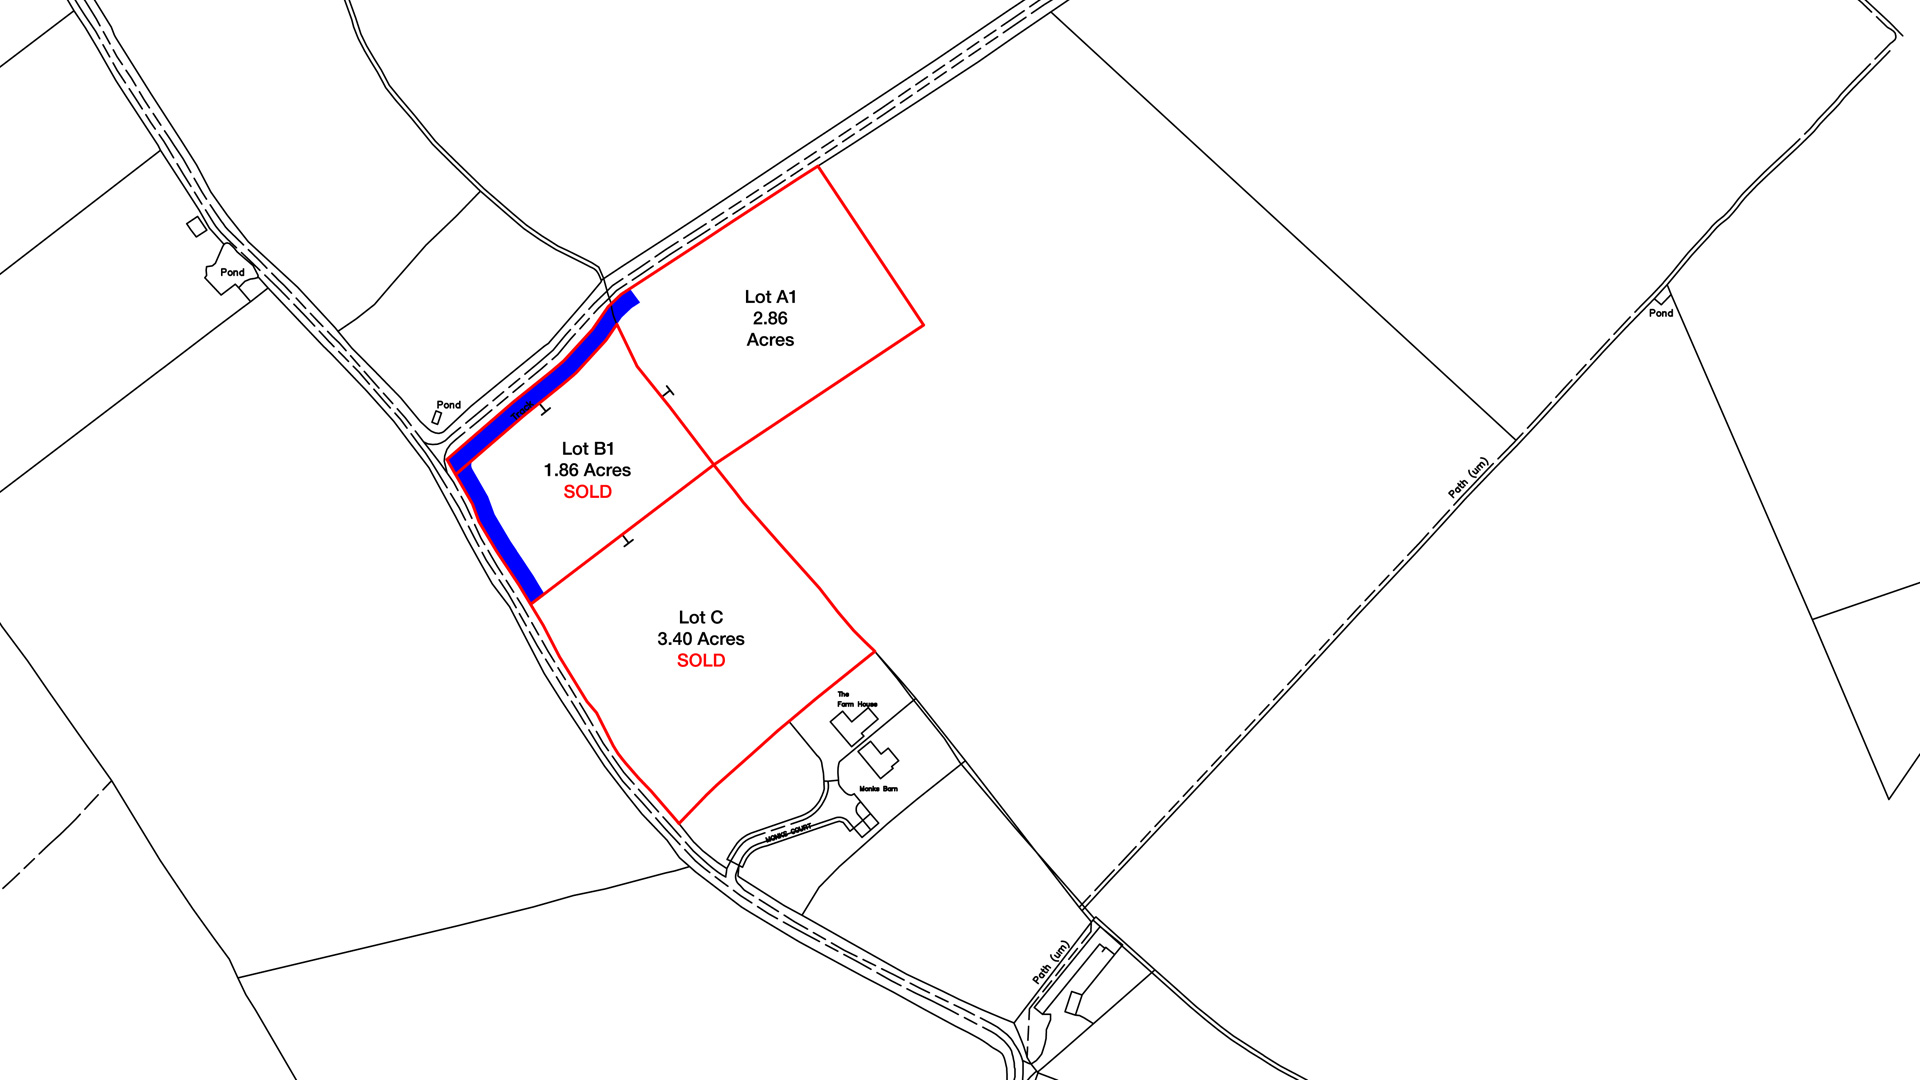 Land for sale in Buckland site plan